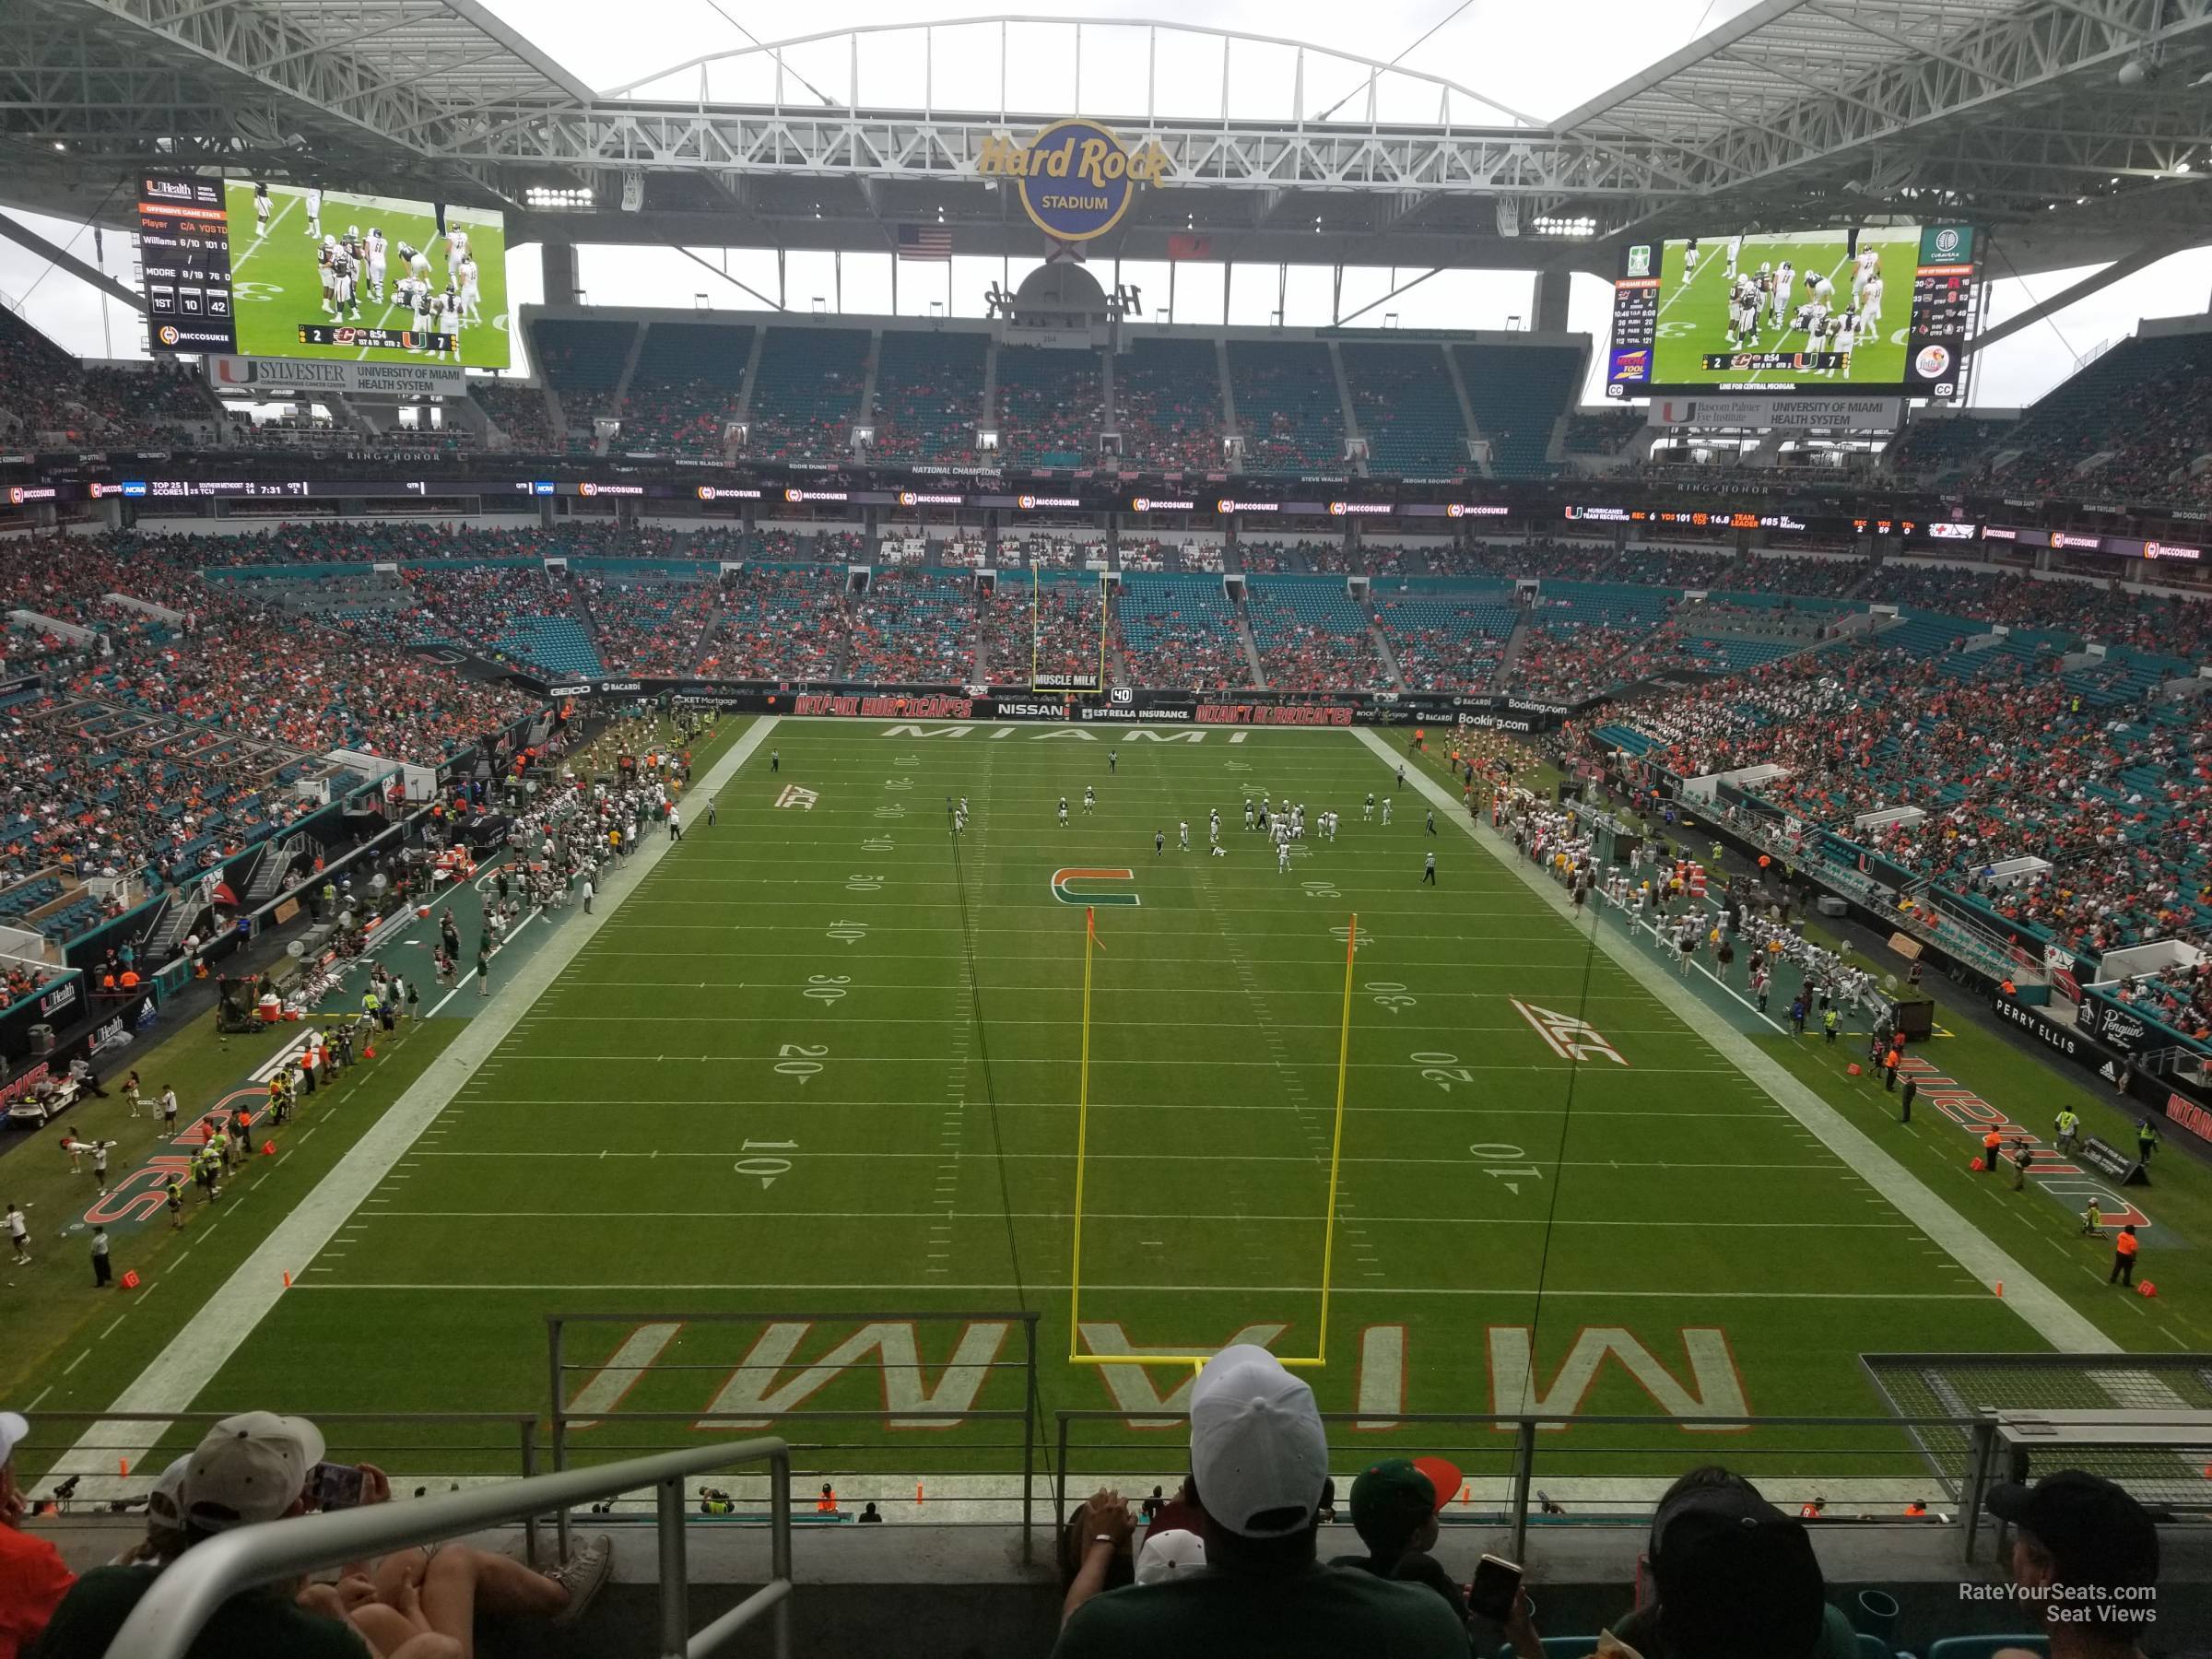 section 332, row 5 seat view  for football - hard rock stadium